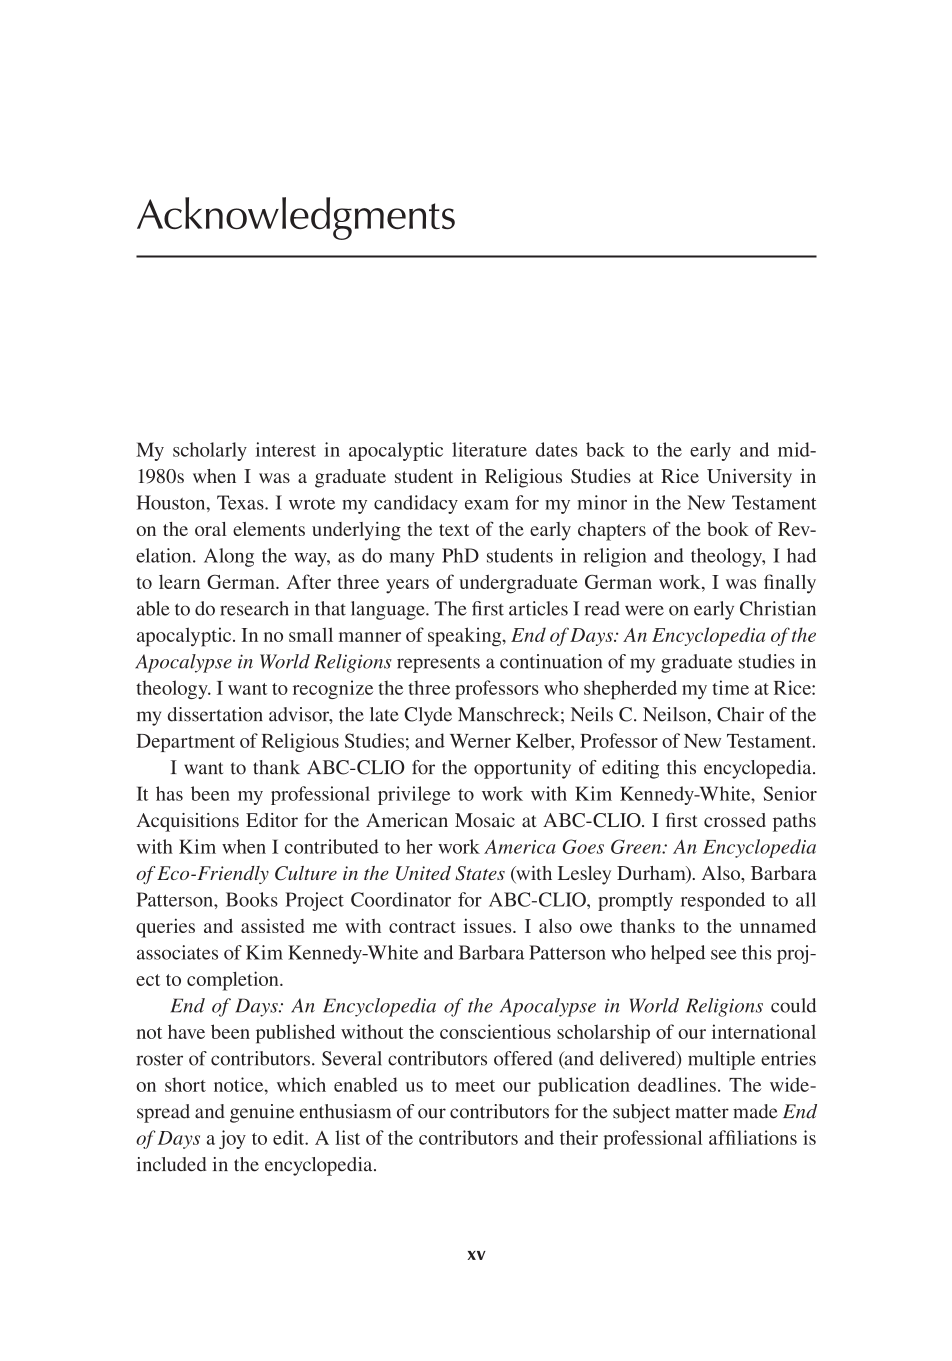 End of Days: An Encyclopedia of the Apocalypse in World Religions page xv